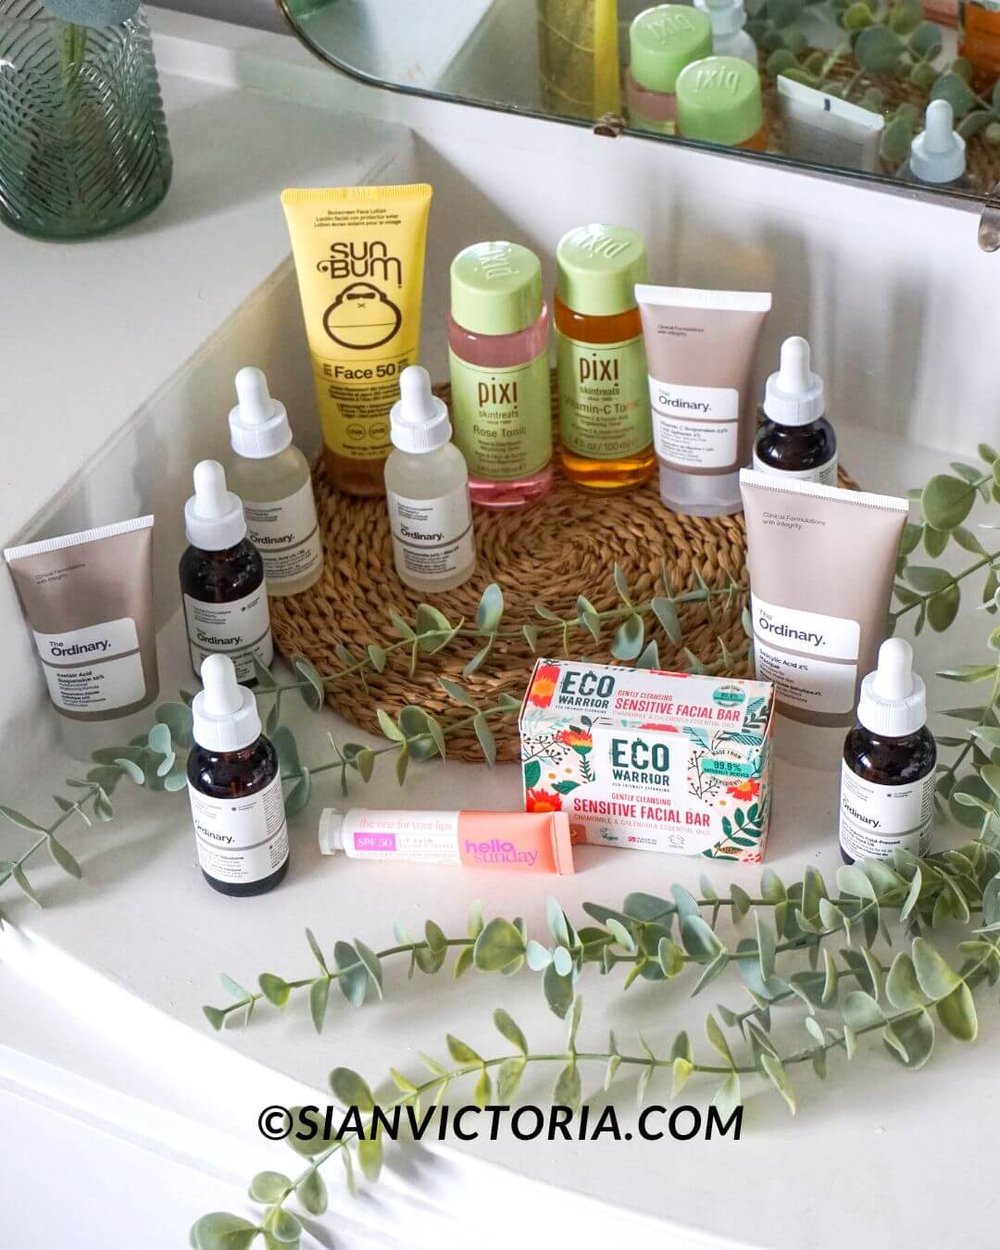 Skincare routines - Boots